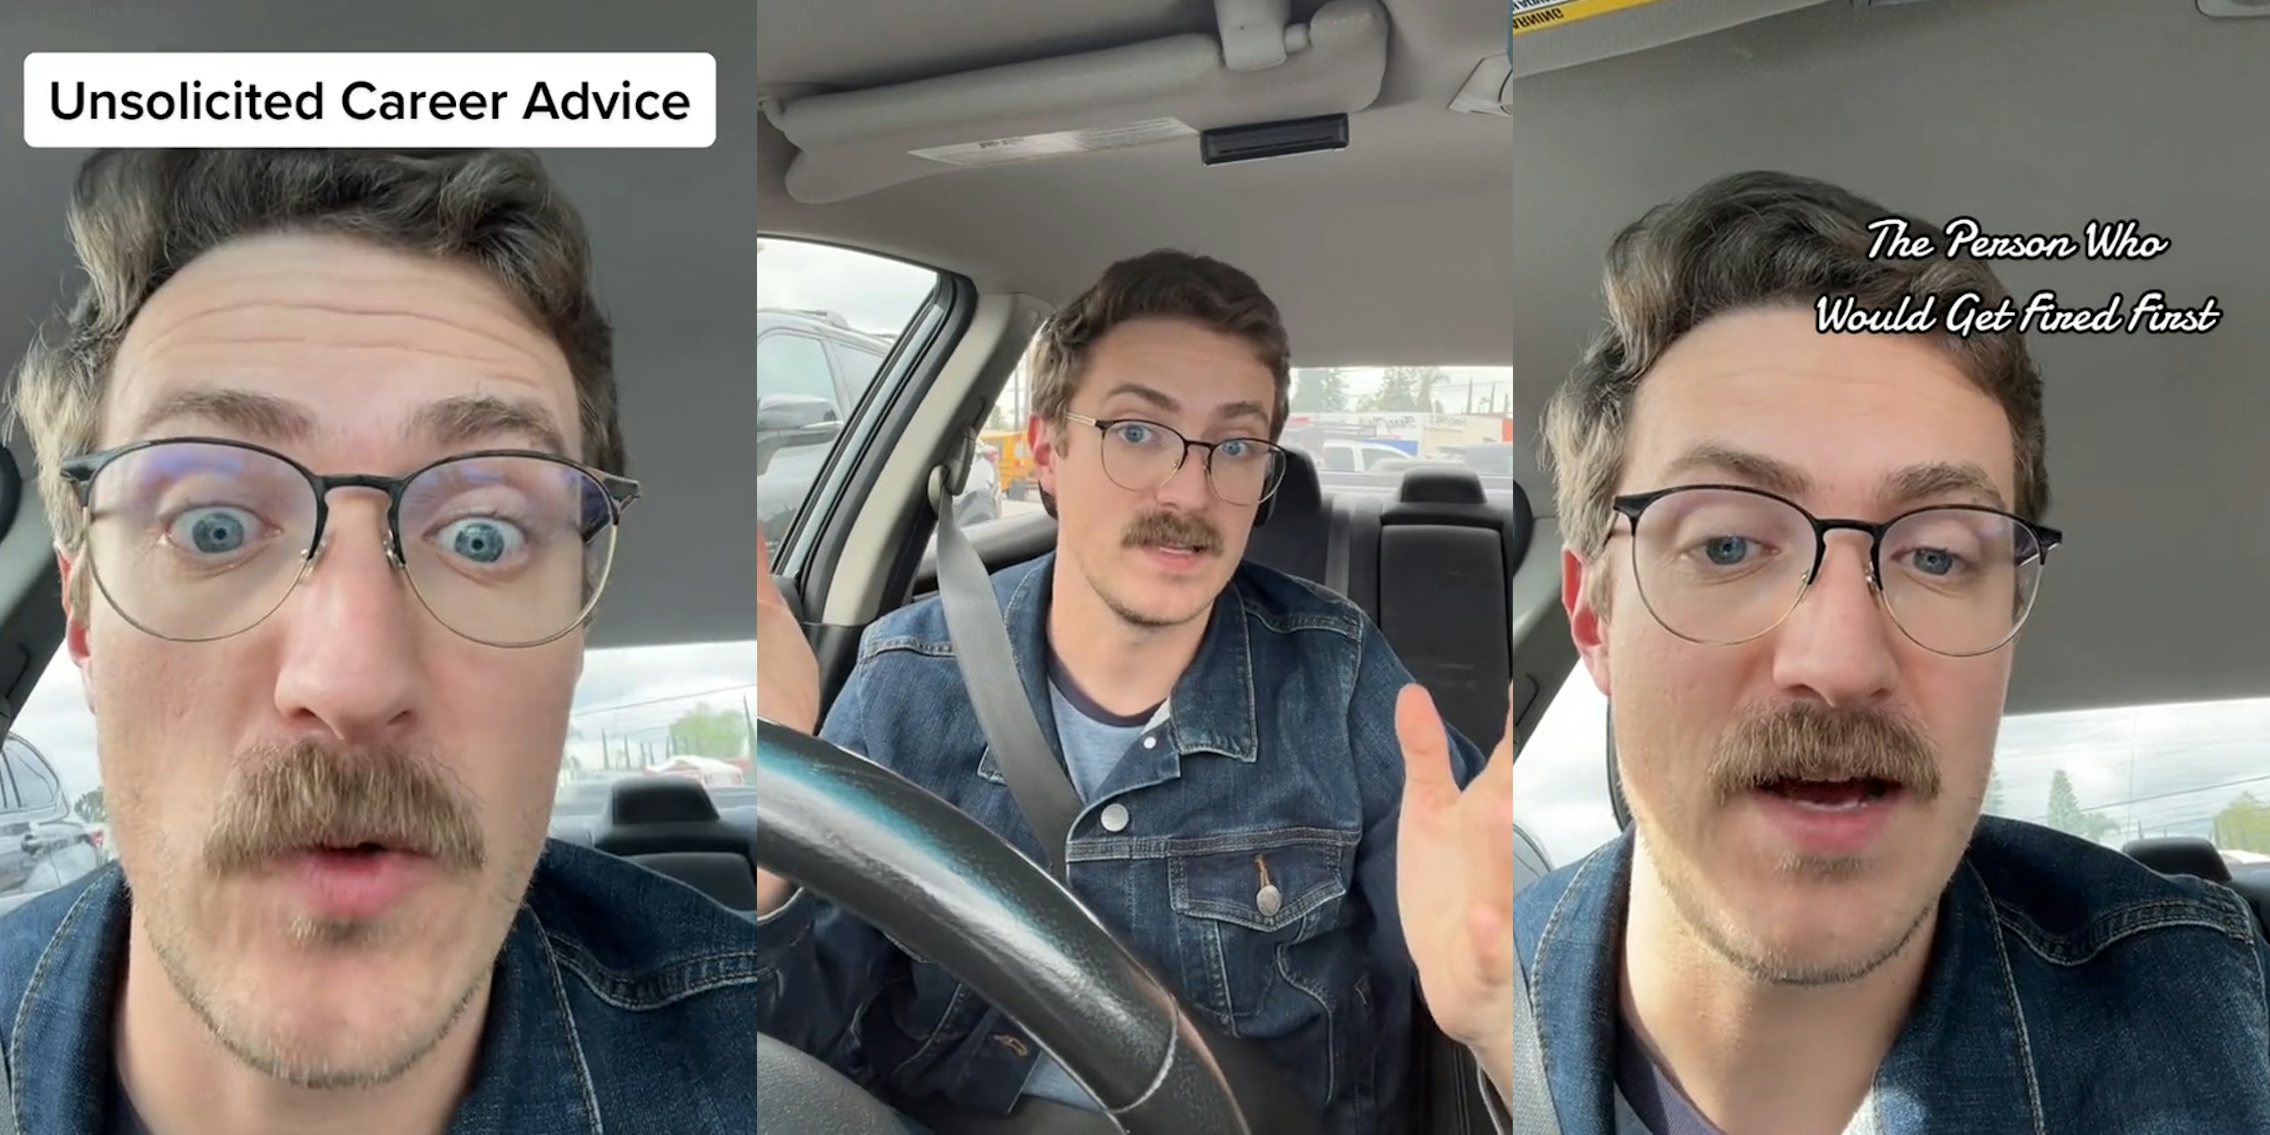 worker speaking in car with caption 'Unsolicited Career Advice' (l) worker speaking in car with hands up (c) worker speaking in car with caption 'The Person Who Would Get Fired First' (r)